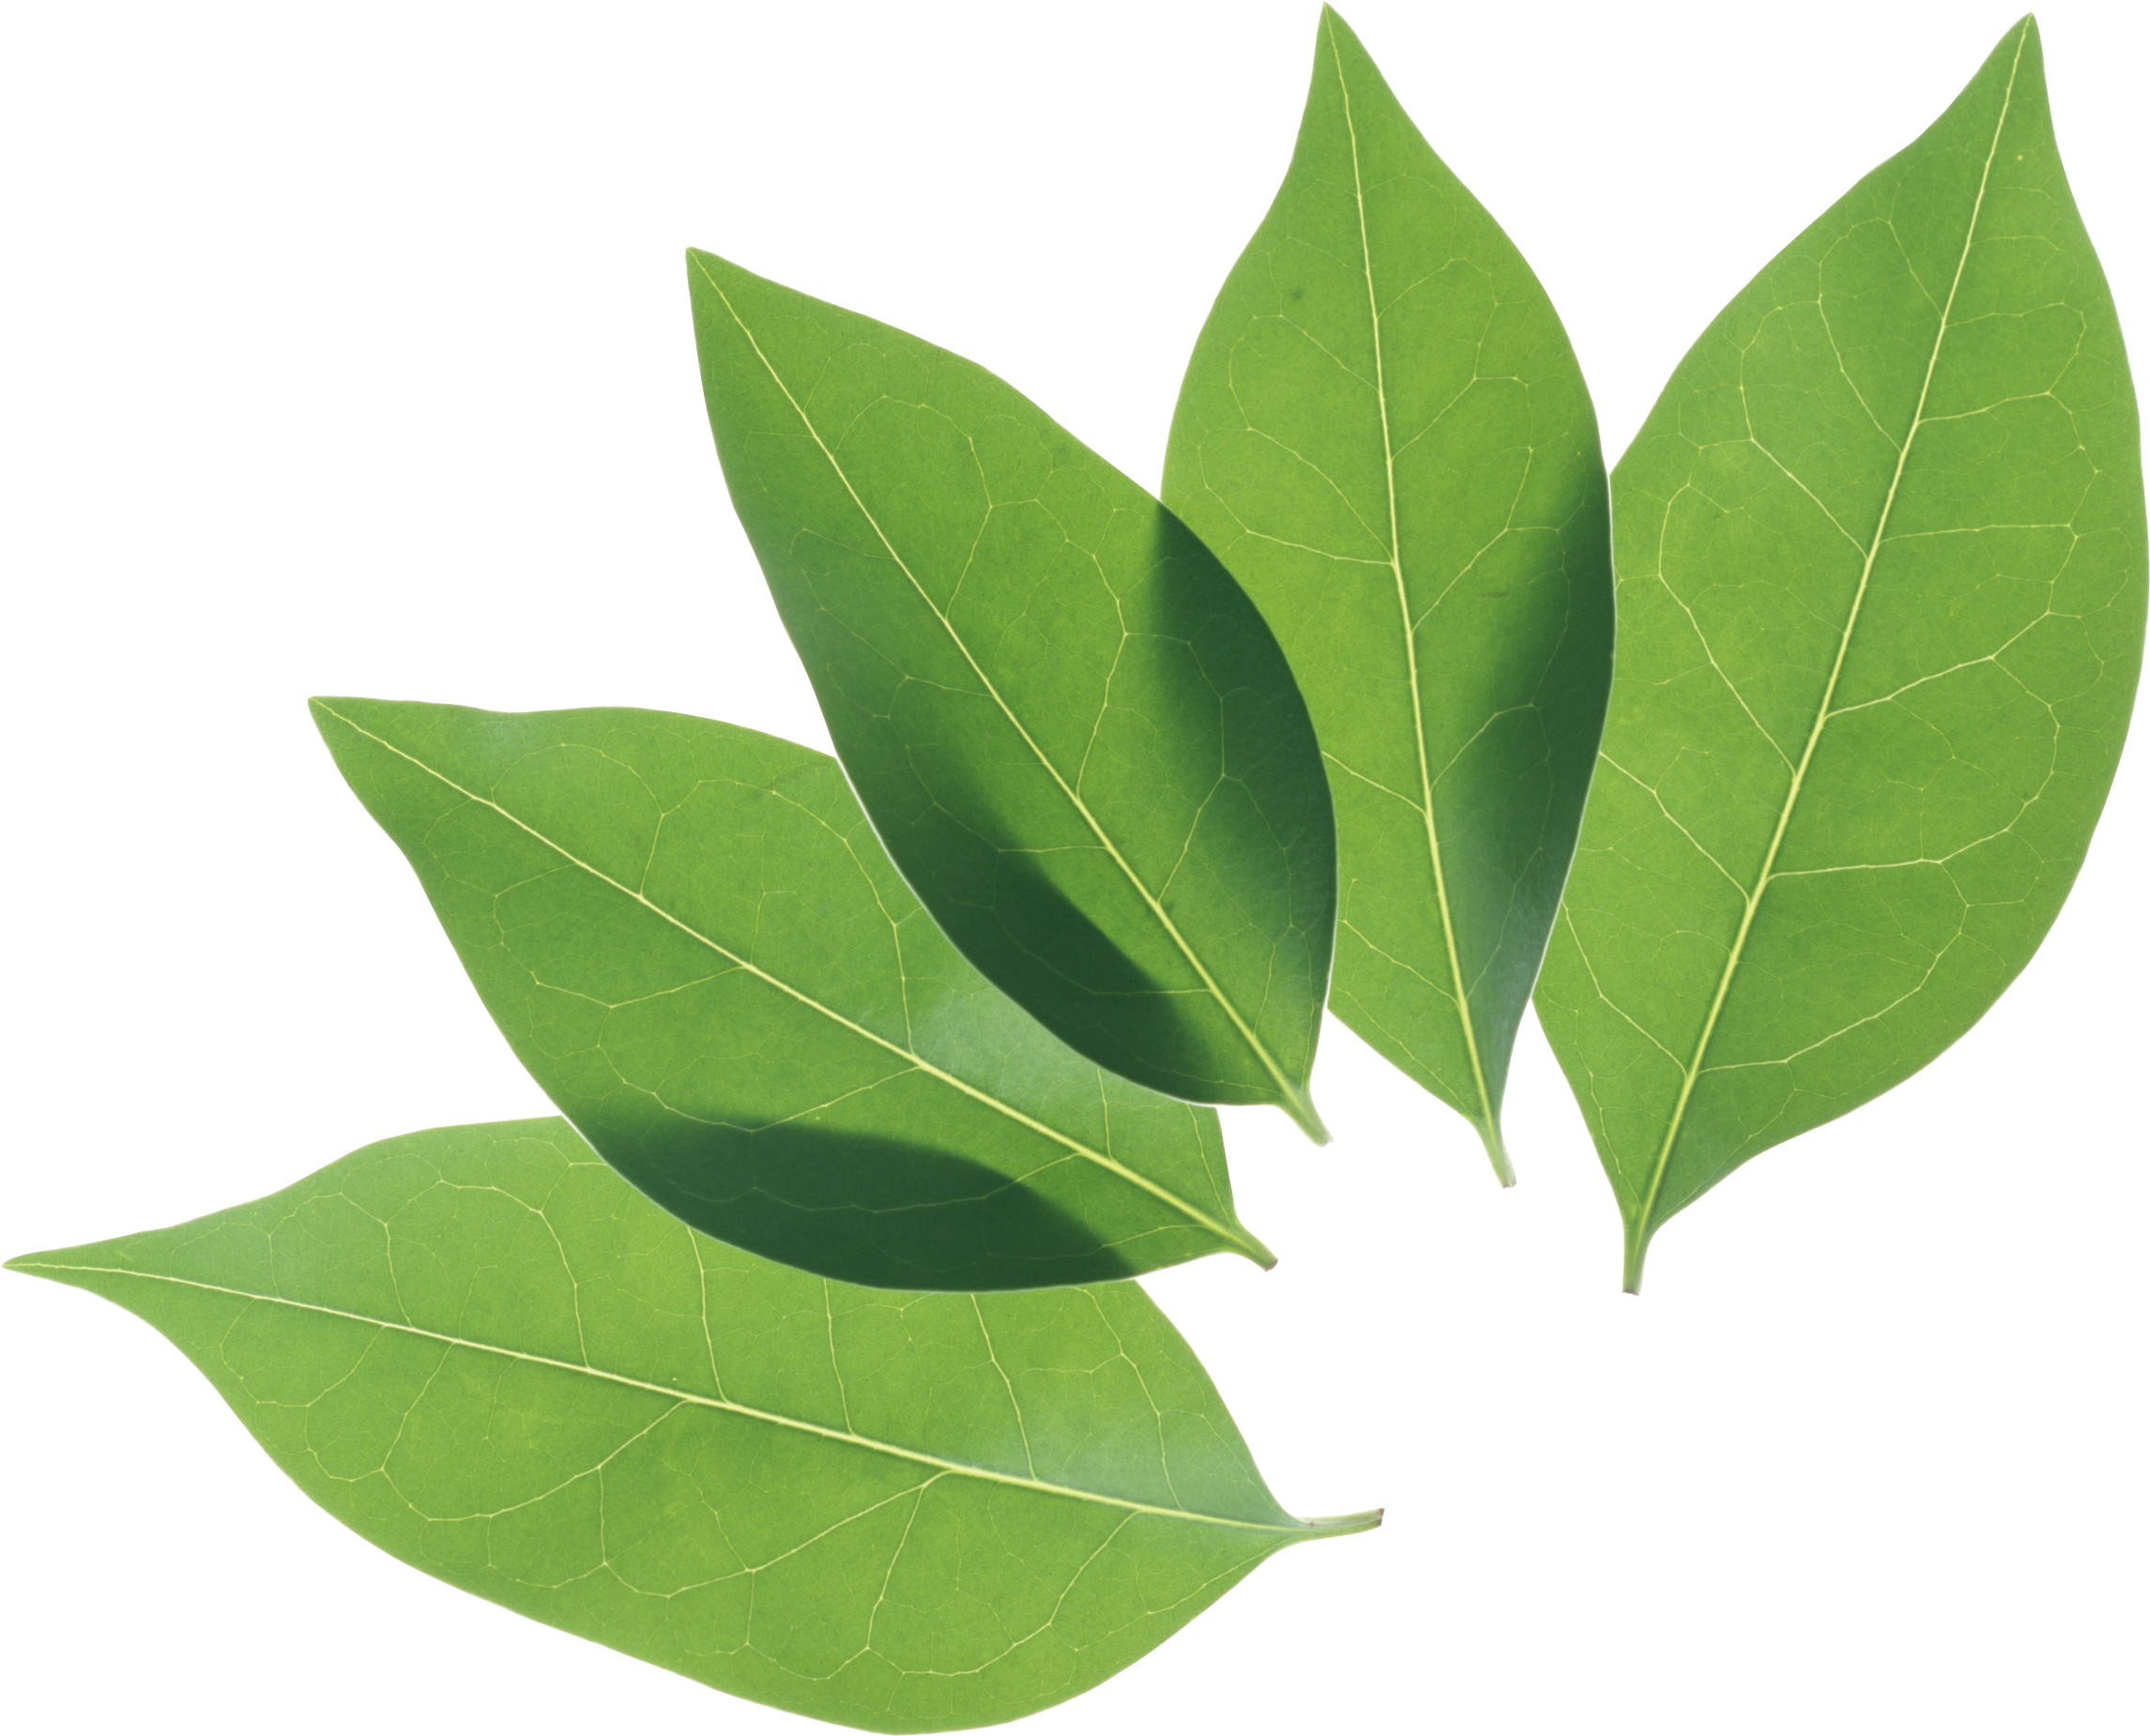 Green Pic Organic Leafs HQ Image Free PNG Image